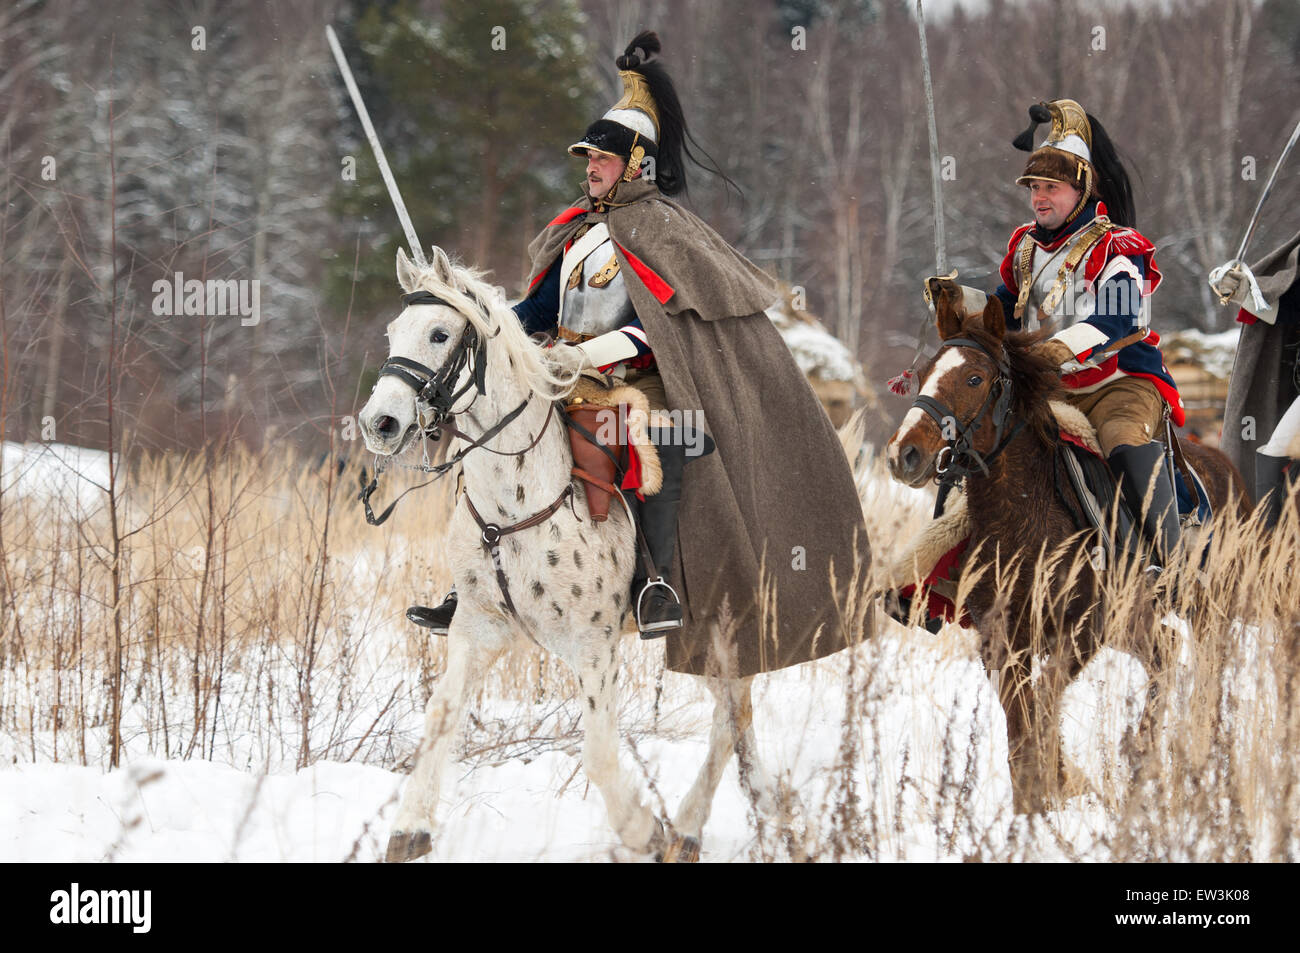 RUSSIA, APRELEVKA - FEBRUARY 7: Unidentified cavalry soldier ride on a horse on reenactment of the Napoleonic maneuvers near the Aprelevka city, in 1812. Moscow region, Aprelevka, 7 February, 2015, Russia Stock Photo